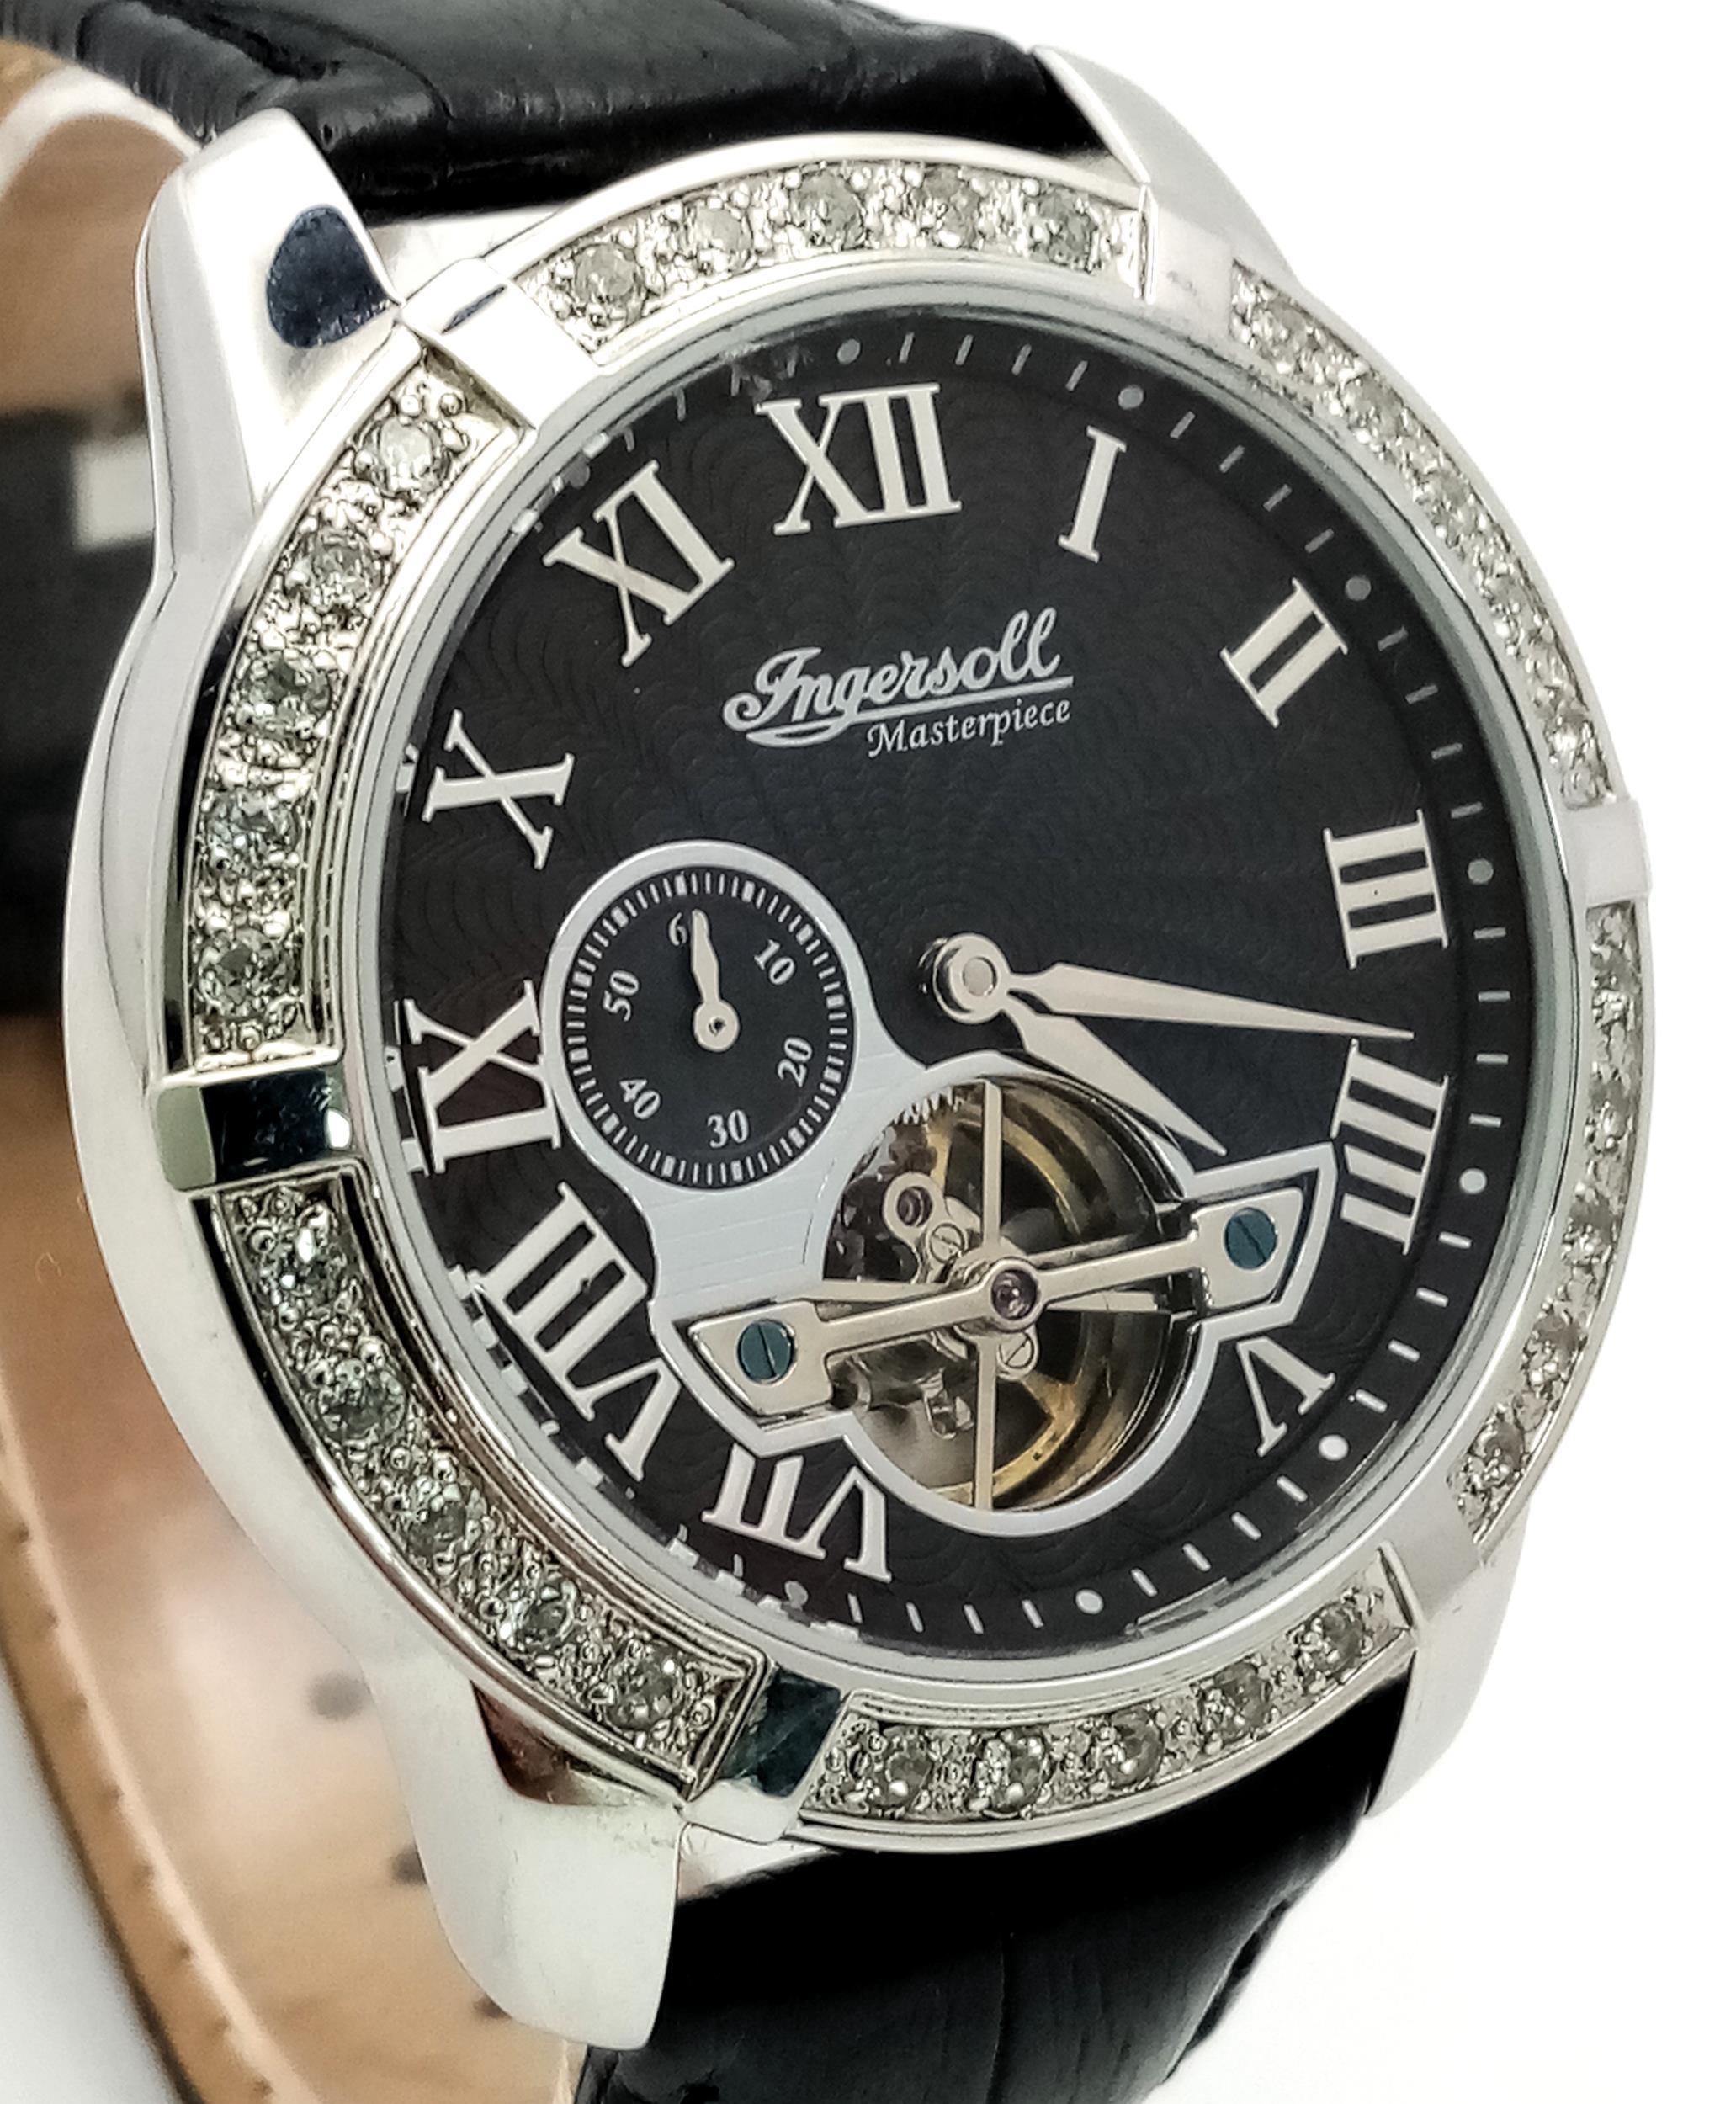 An Ingersoll Masterpiece Skeleton Gents Automatic Watch. Black leather strap. Stainless steel case - - Image 4 of 5